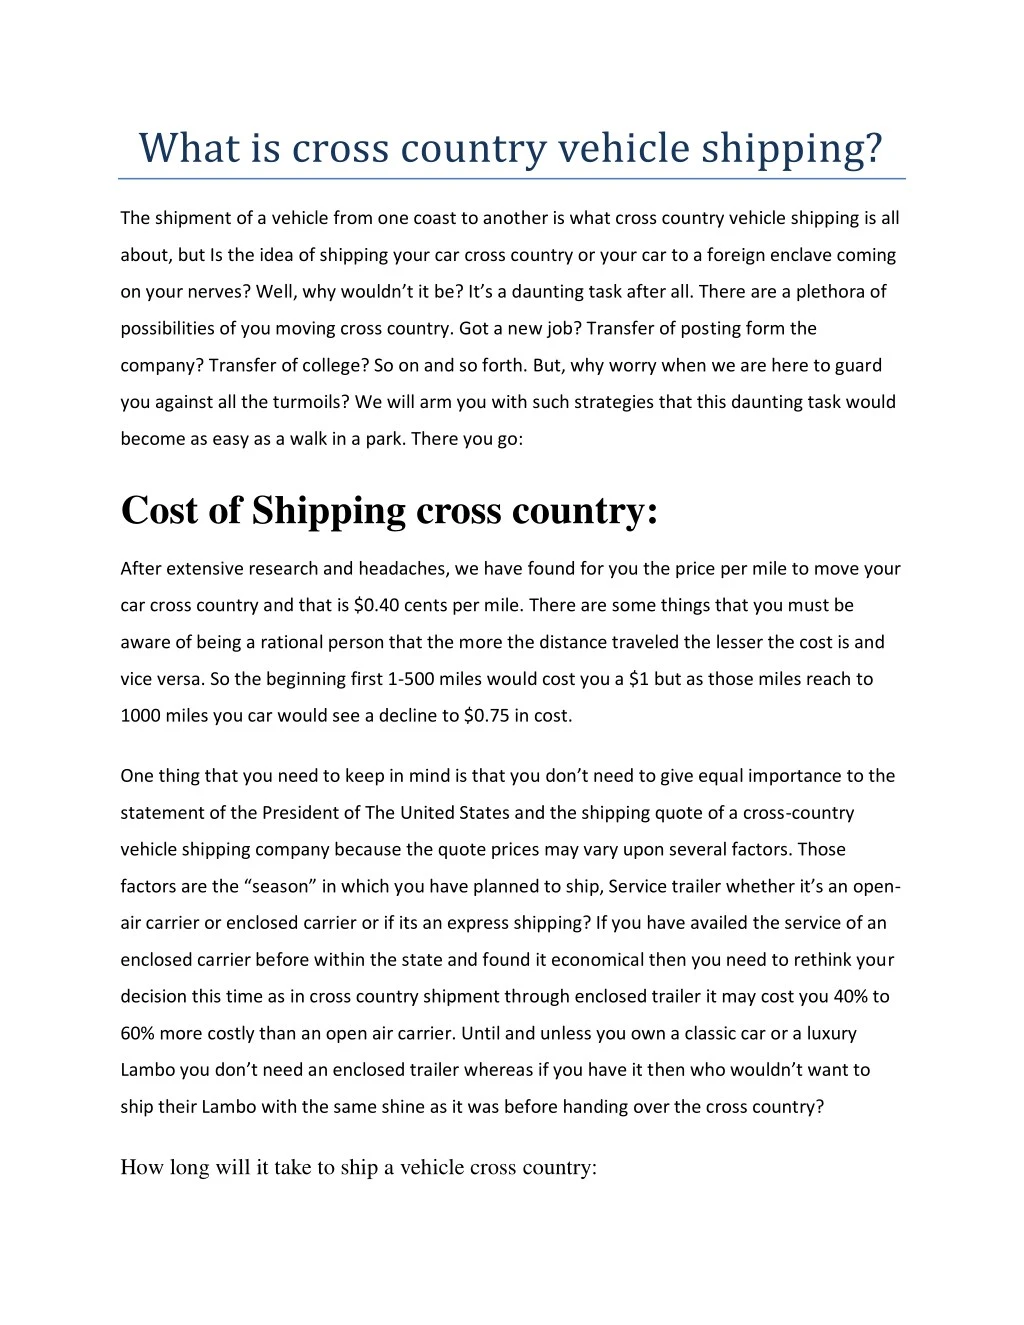 what is cross country vehicle shipping